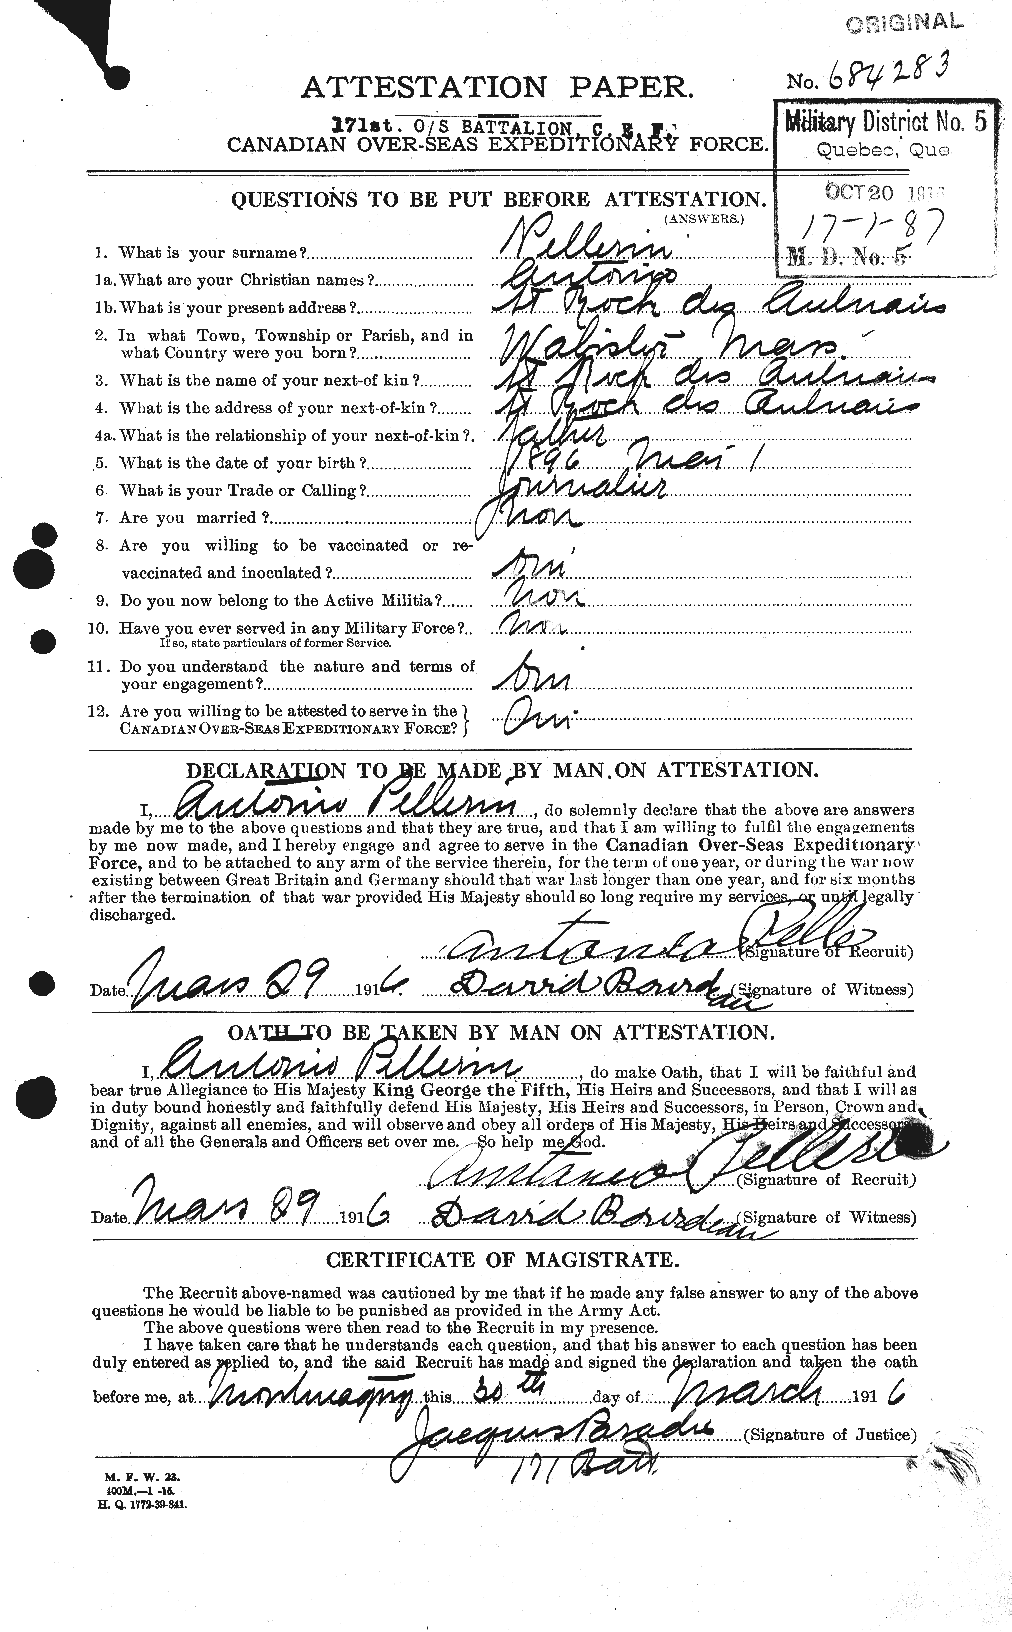 Personnel Records of the First World War - CEF 572235a